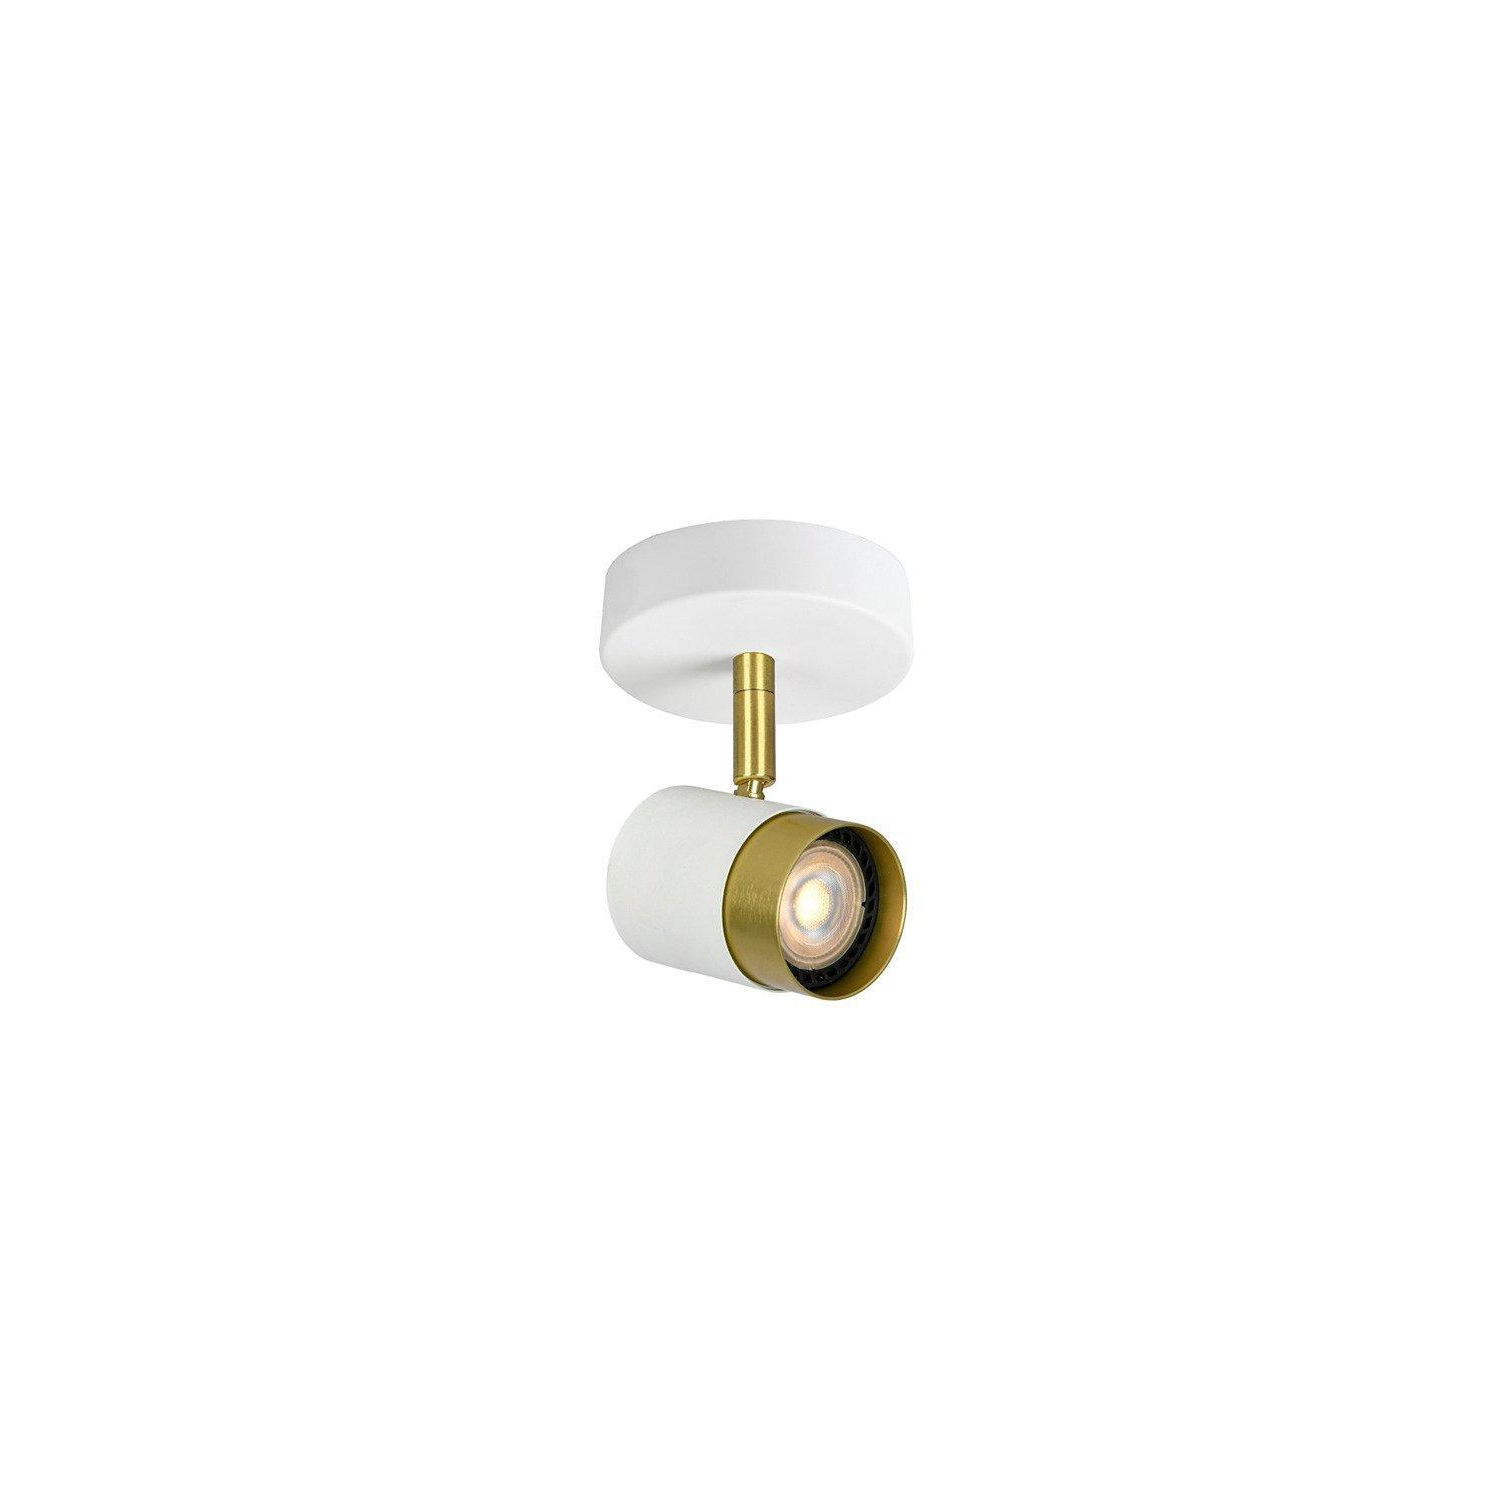 'Orio'  White and Brushed Gold Single GU10 Adjustable Ceiling Spot Light - image 1